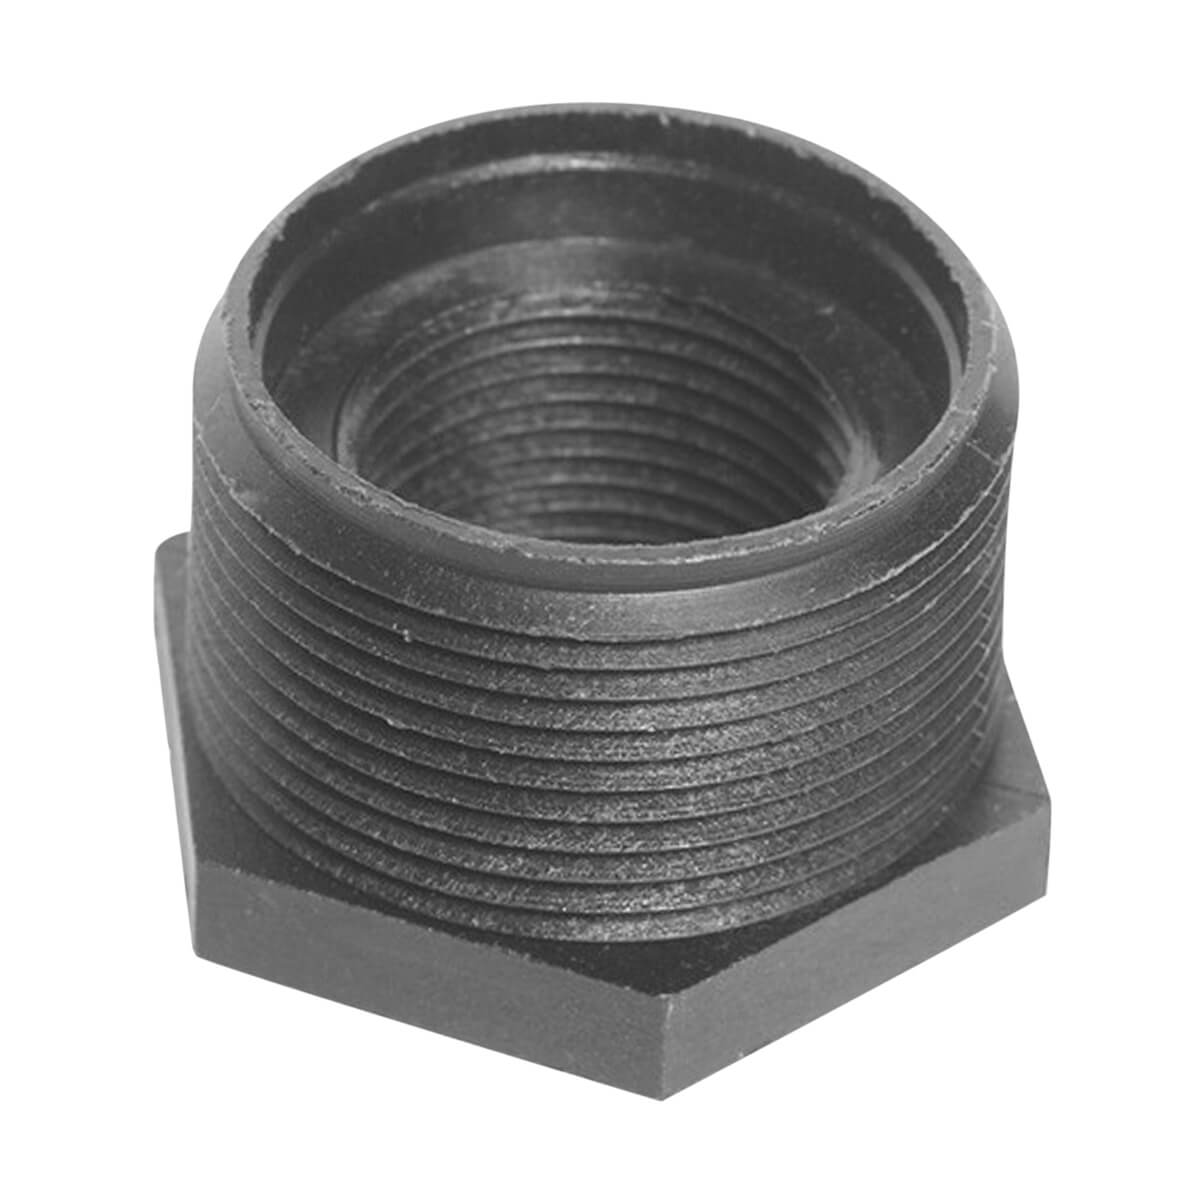 Reducer Bushings MPT x FPT - 1-in x 1/2-in